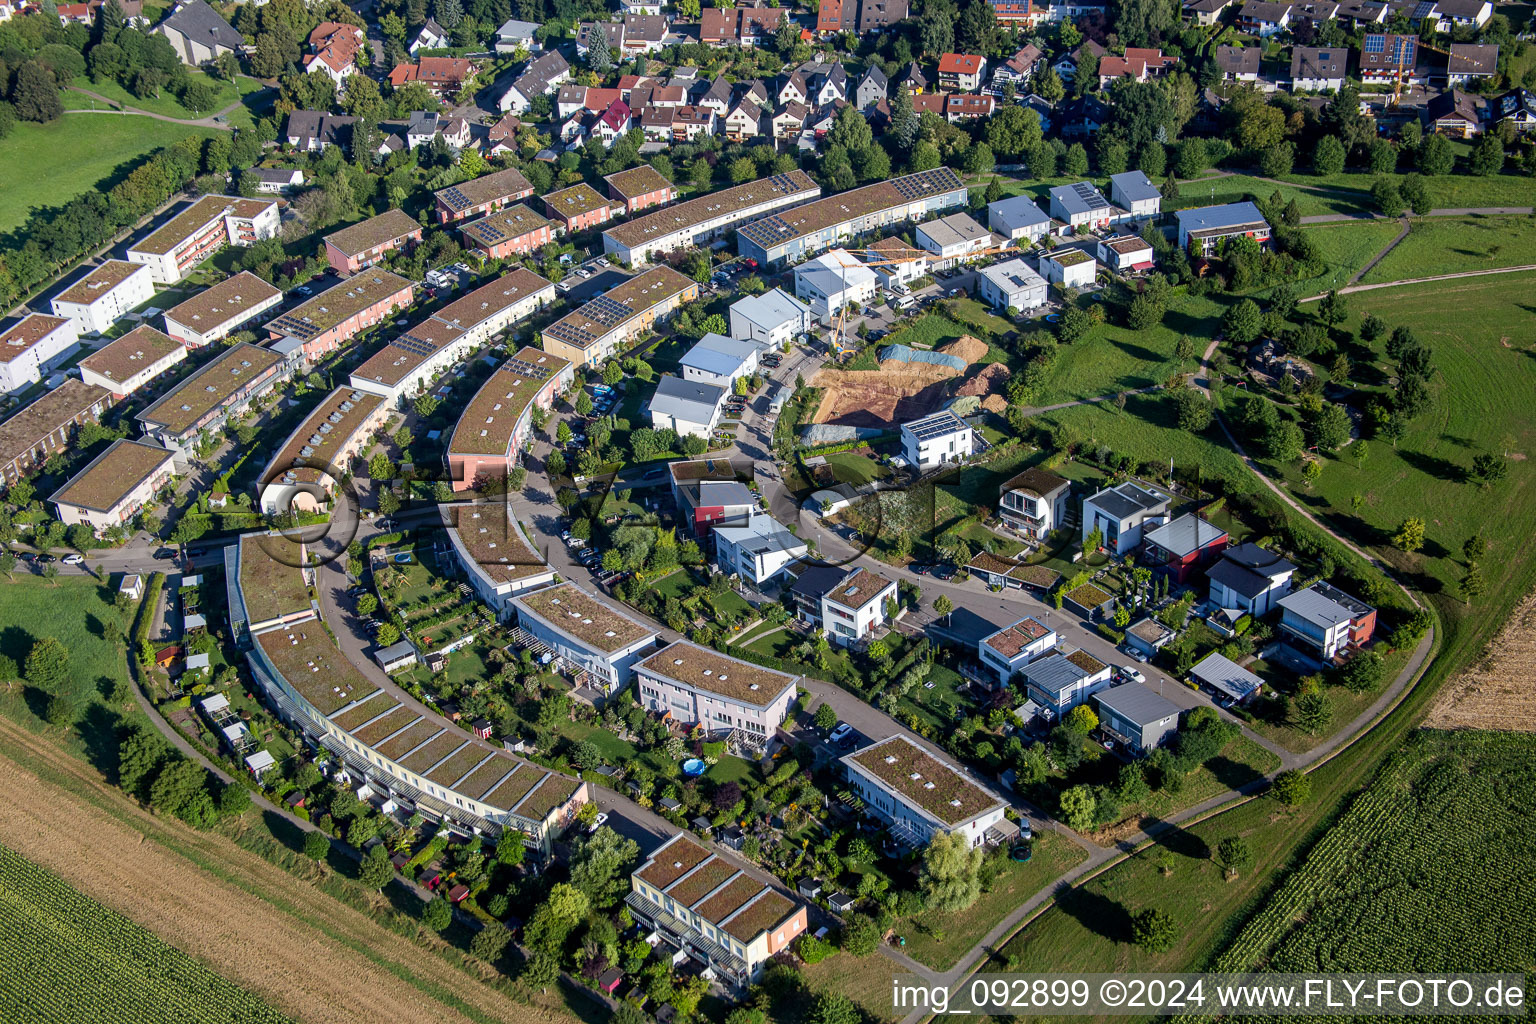 Single-family residential area of settlement Fuenfzig Morgen in Hohenwettersbach in the state Baden-Wurttemberg, Germany